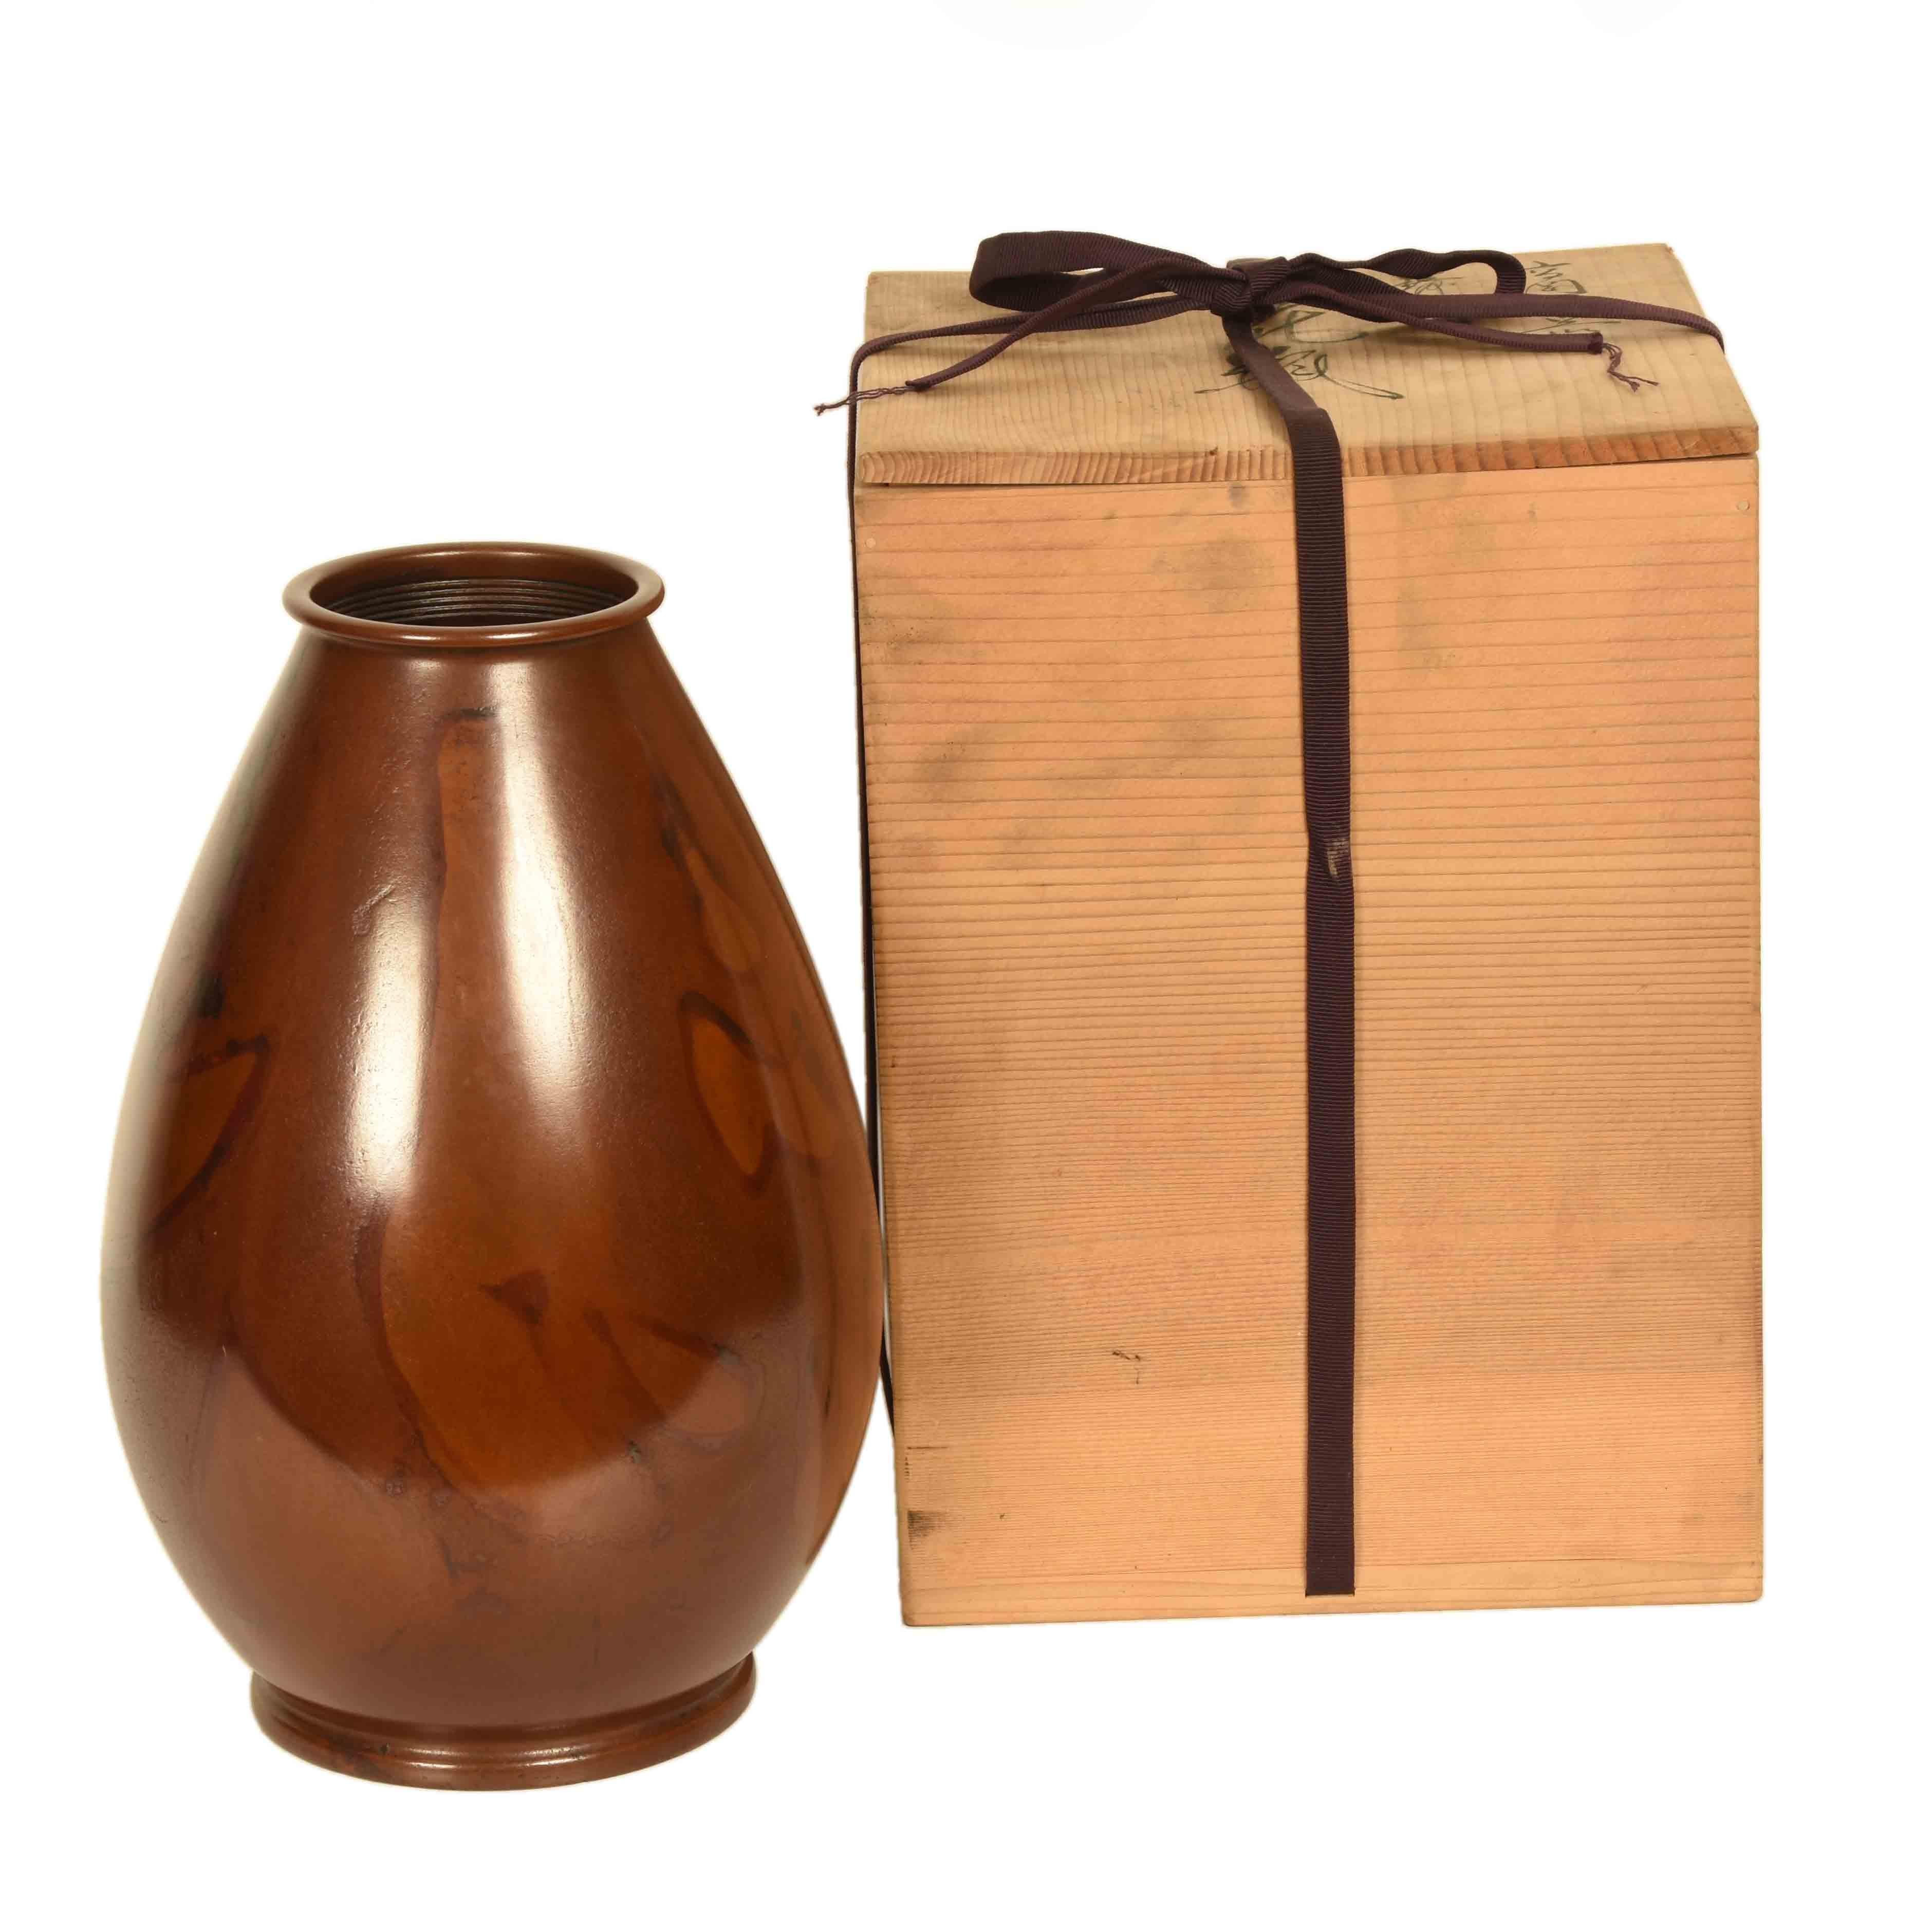 A vintage, Japanese red bronze vase from Yamagata. Yamagata is both a city and prefecture on the main island of Honshu. While bronze work originated in China, Japanese artisans have developed an array of techniques in the production of decorative